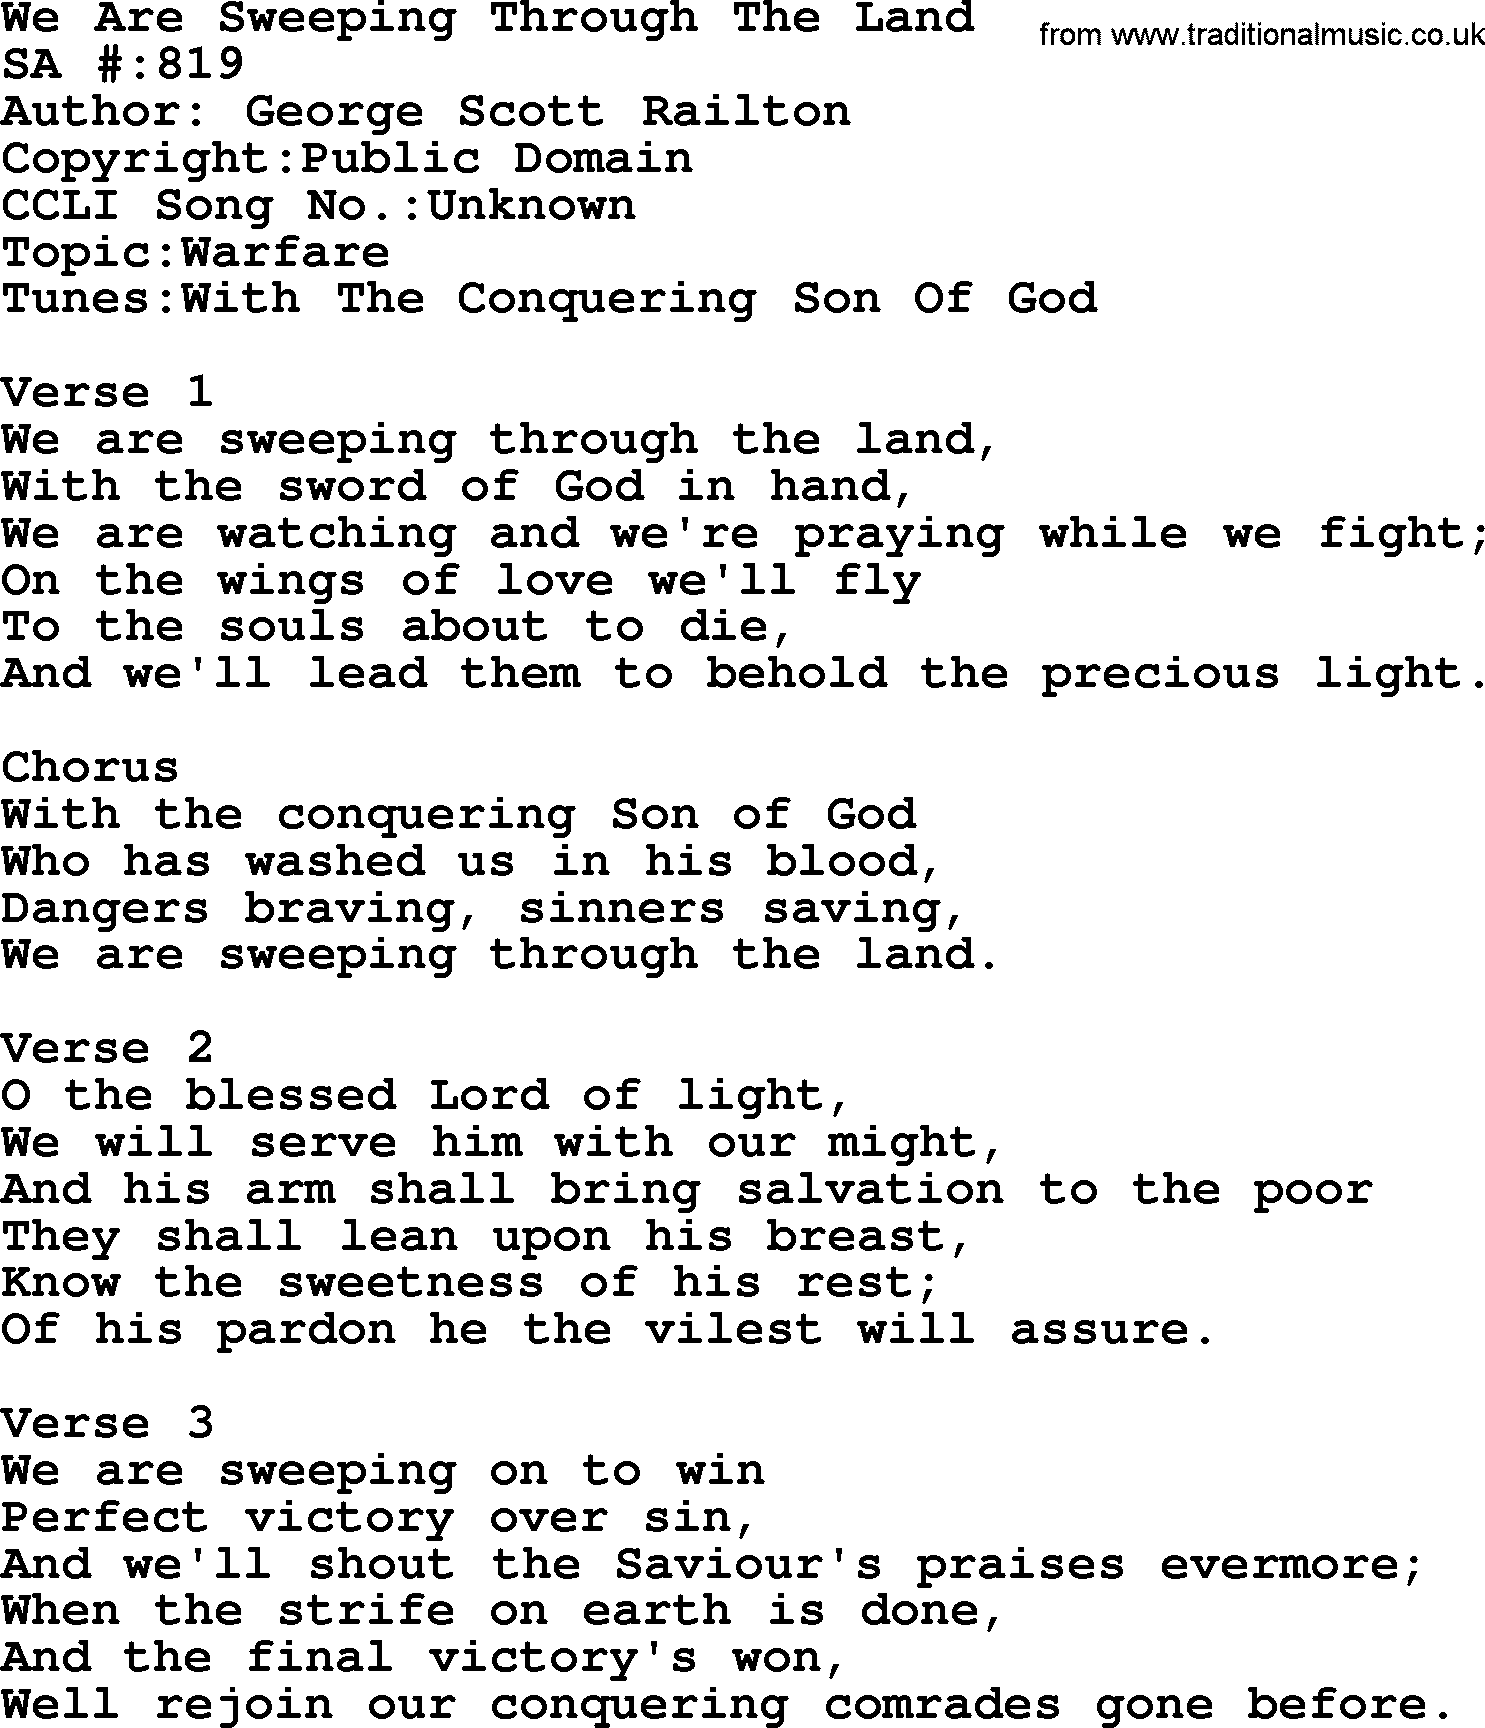 Salvation Army Hymnal, title: We Are Sweeping Through The Land, with lyrics and PDF,